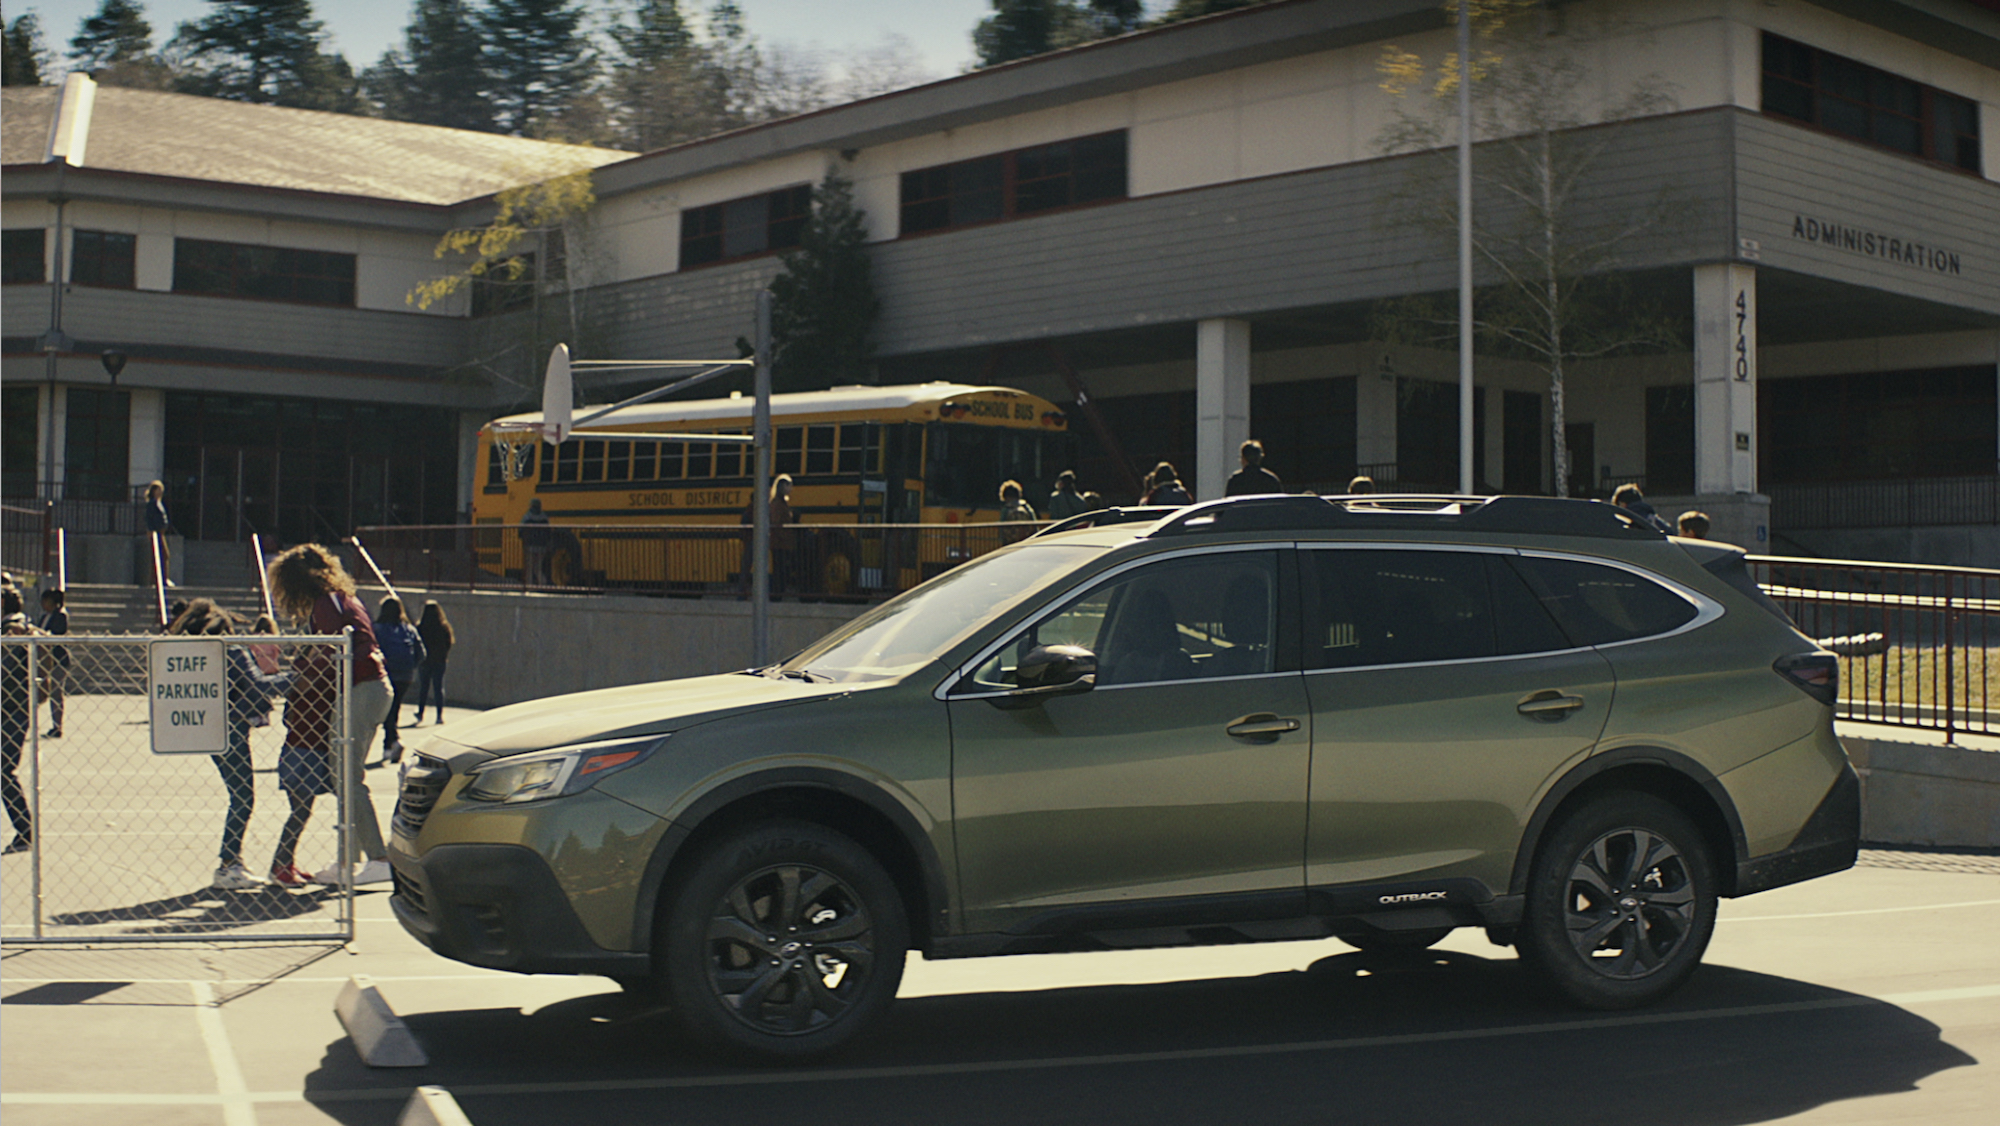 A 2020 Subaru Outback parked in front of a school.